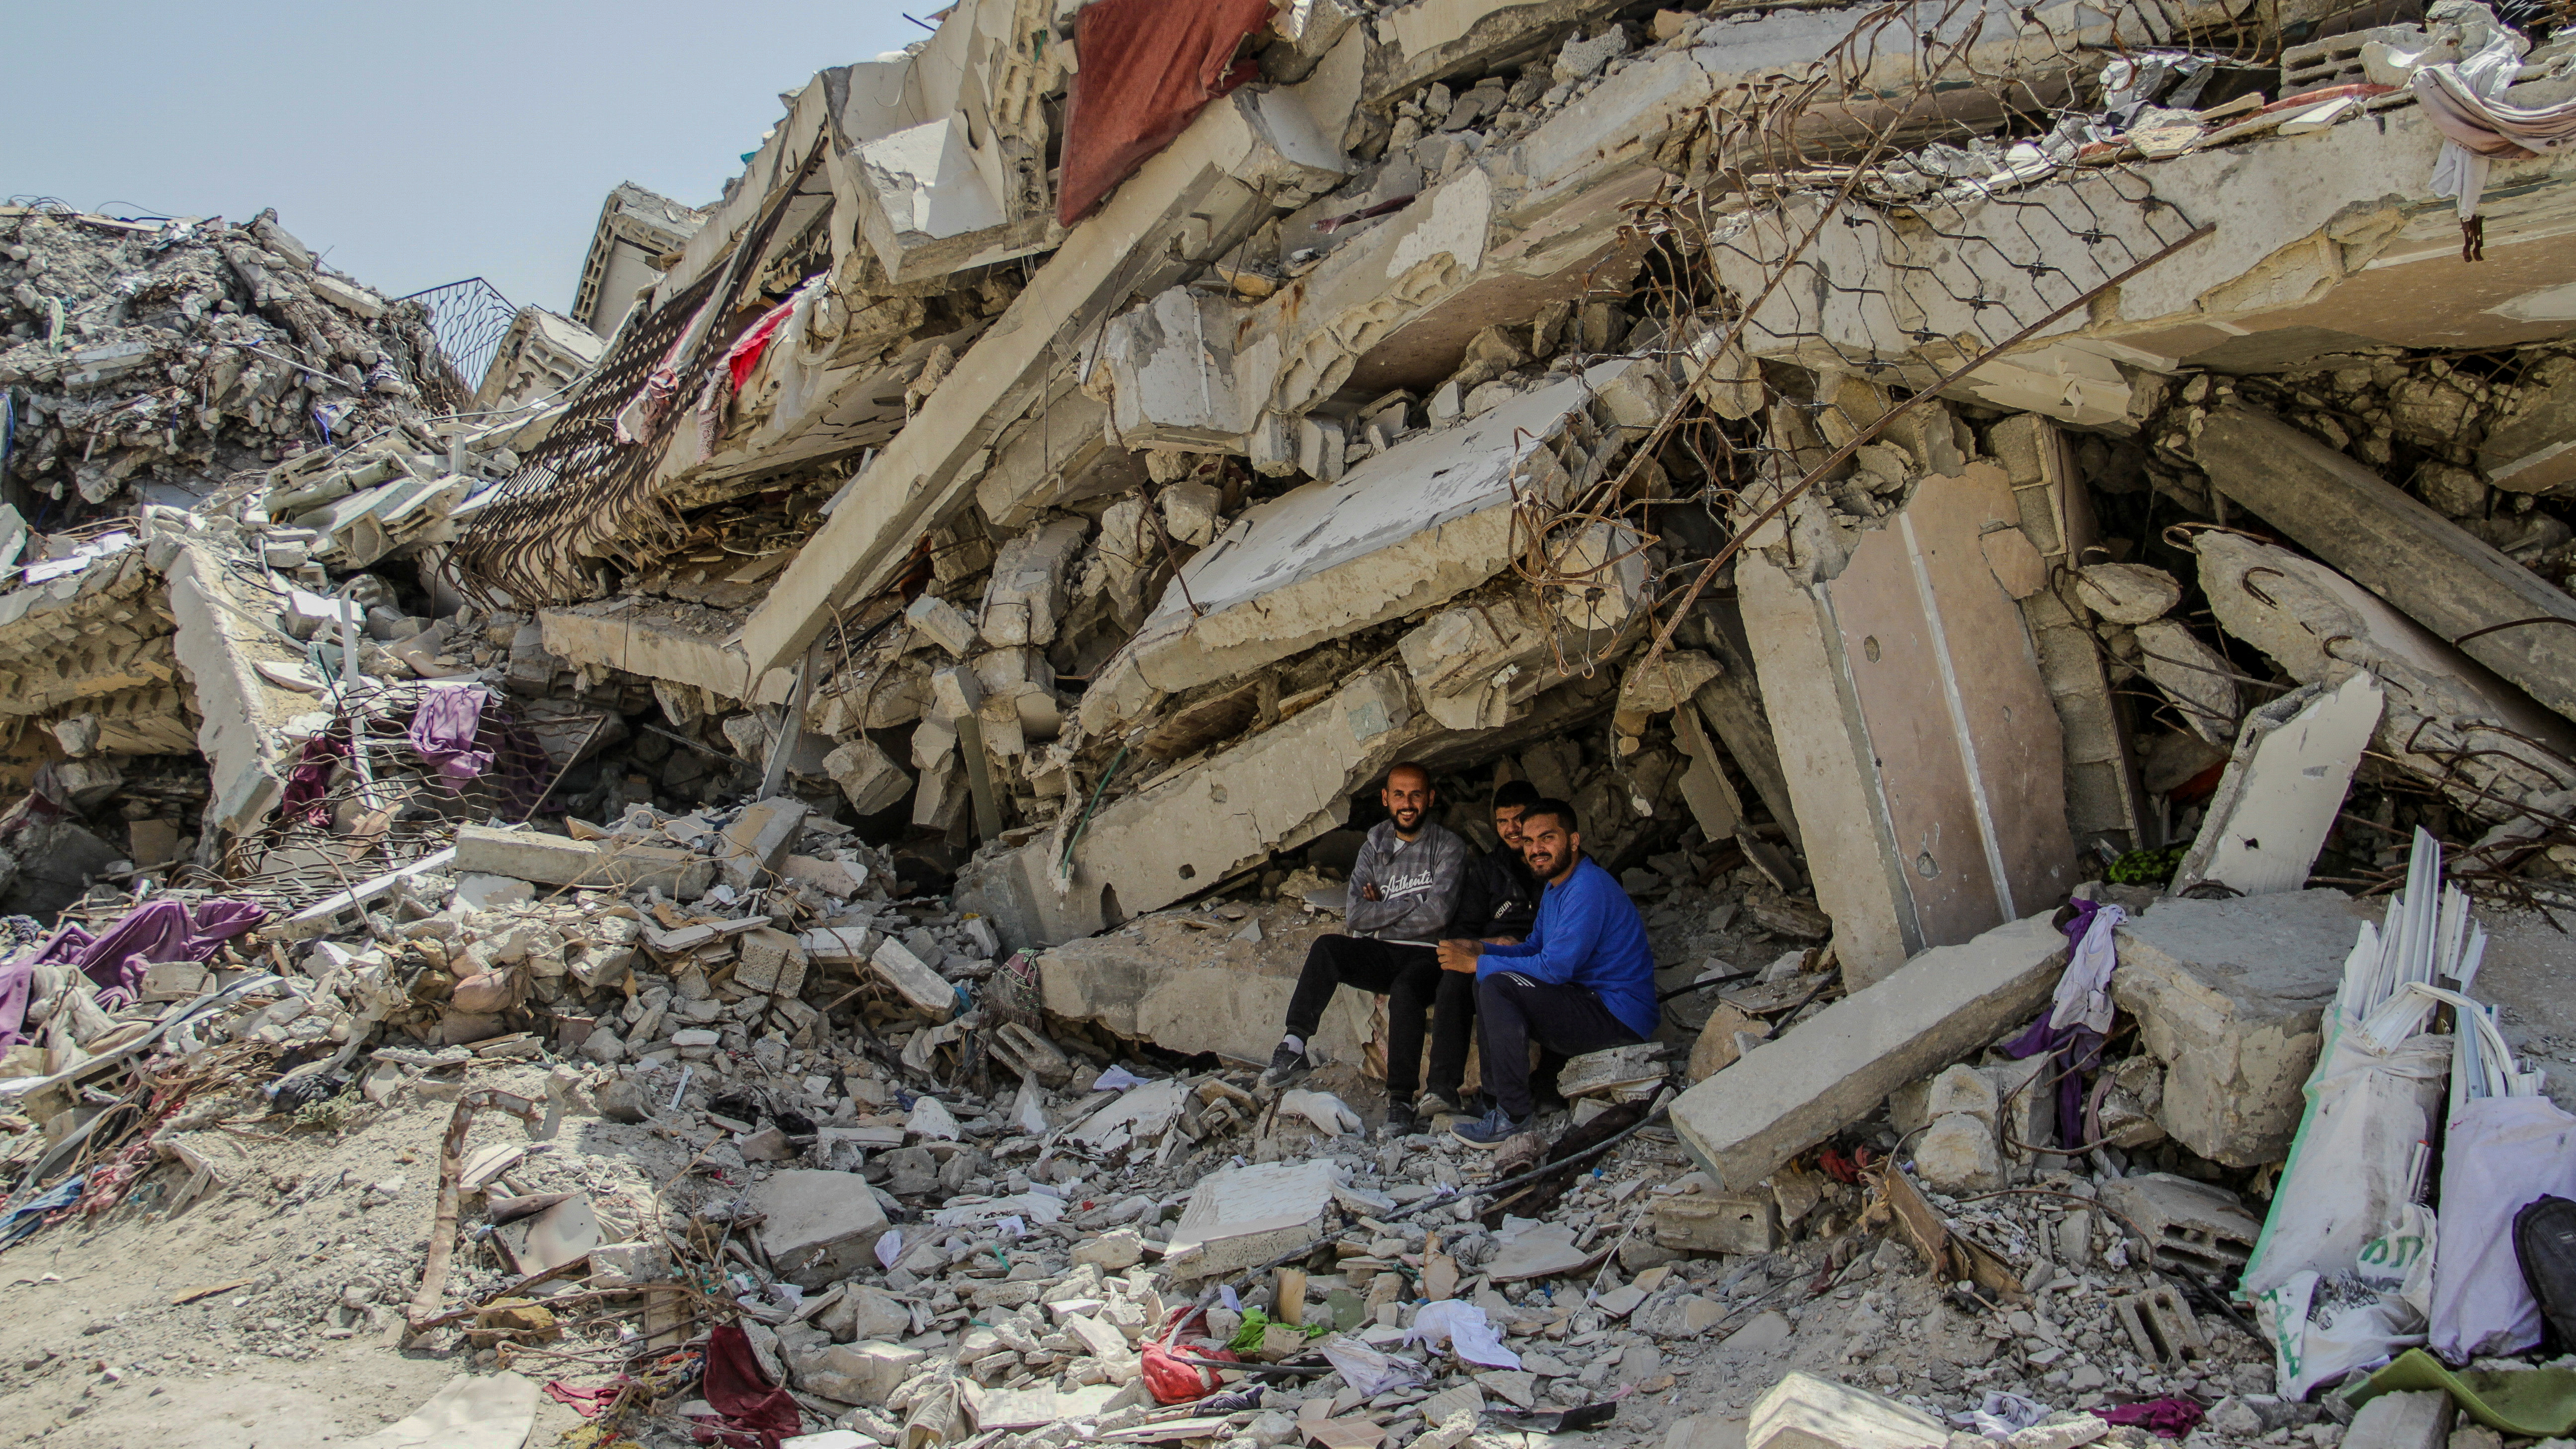 Gazan residents rest in the shade of a collapsed building /Mahmoud Issa/Reuters